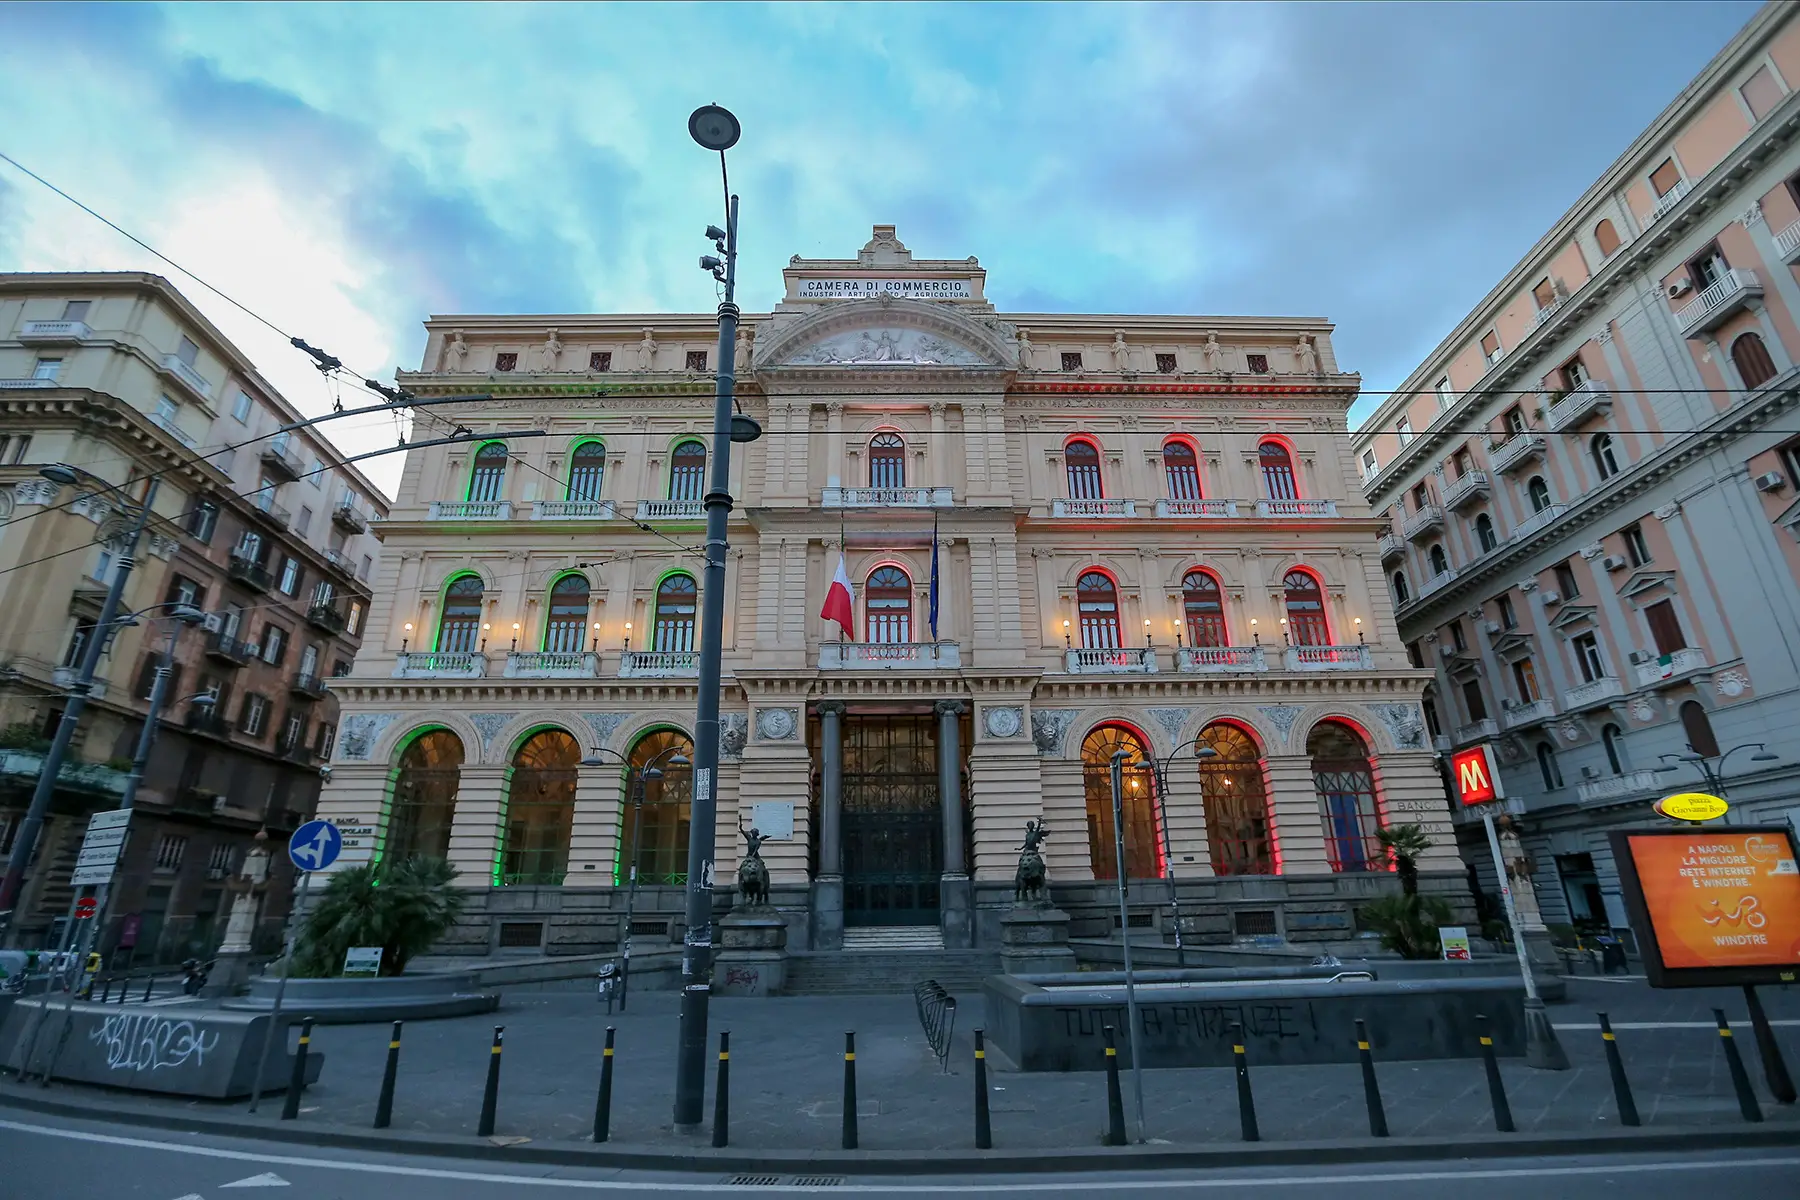 Chamber of Commerce Building in Naples. A grand old building illuminated with the colors of the Italian flag